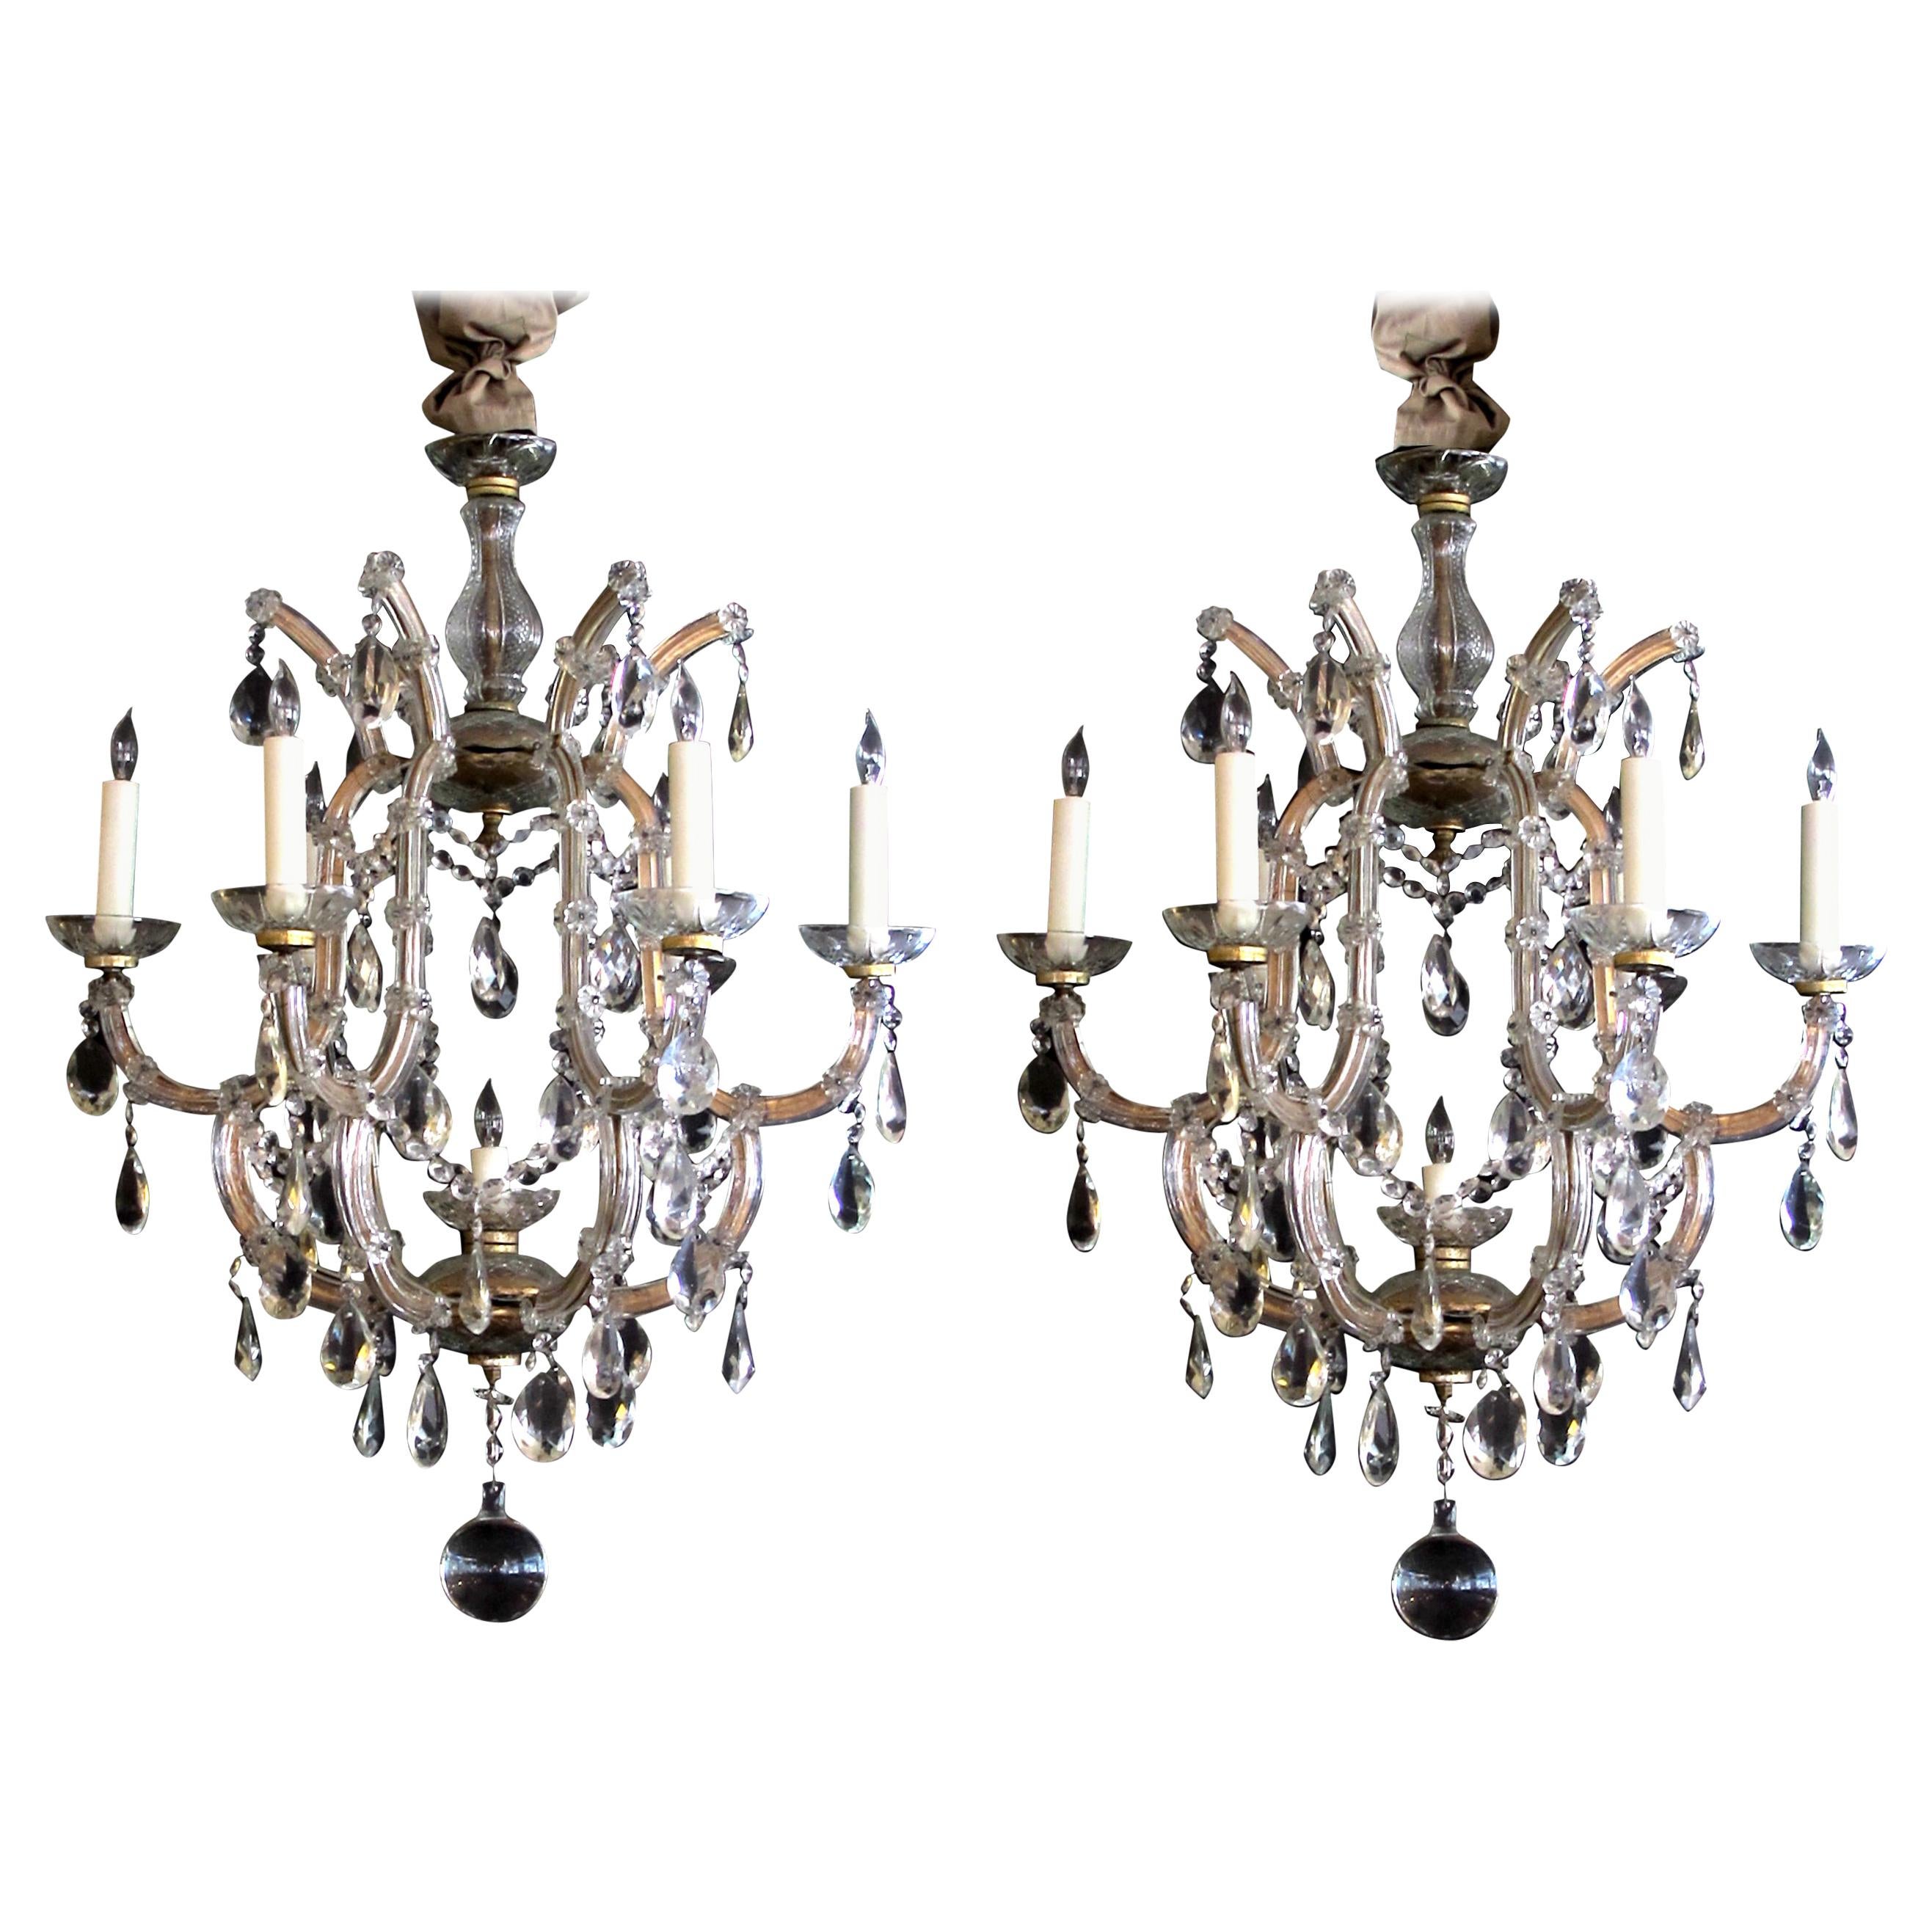 Good Pair of Continental Maria Theresa Basket-From Glass and Crystal Chandeliers